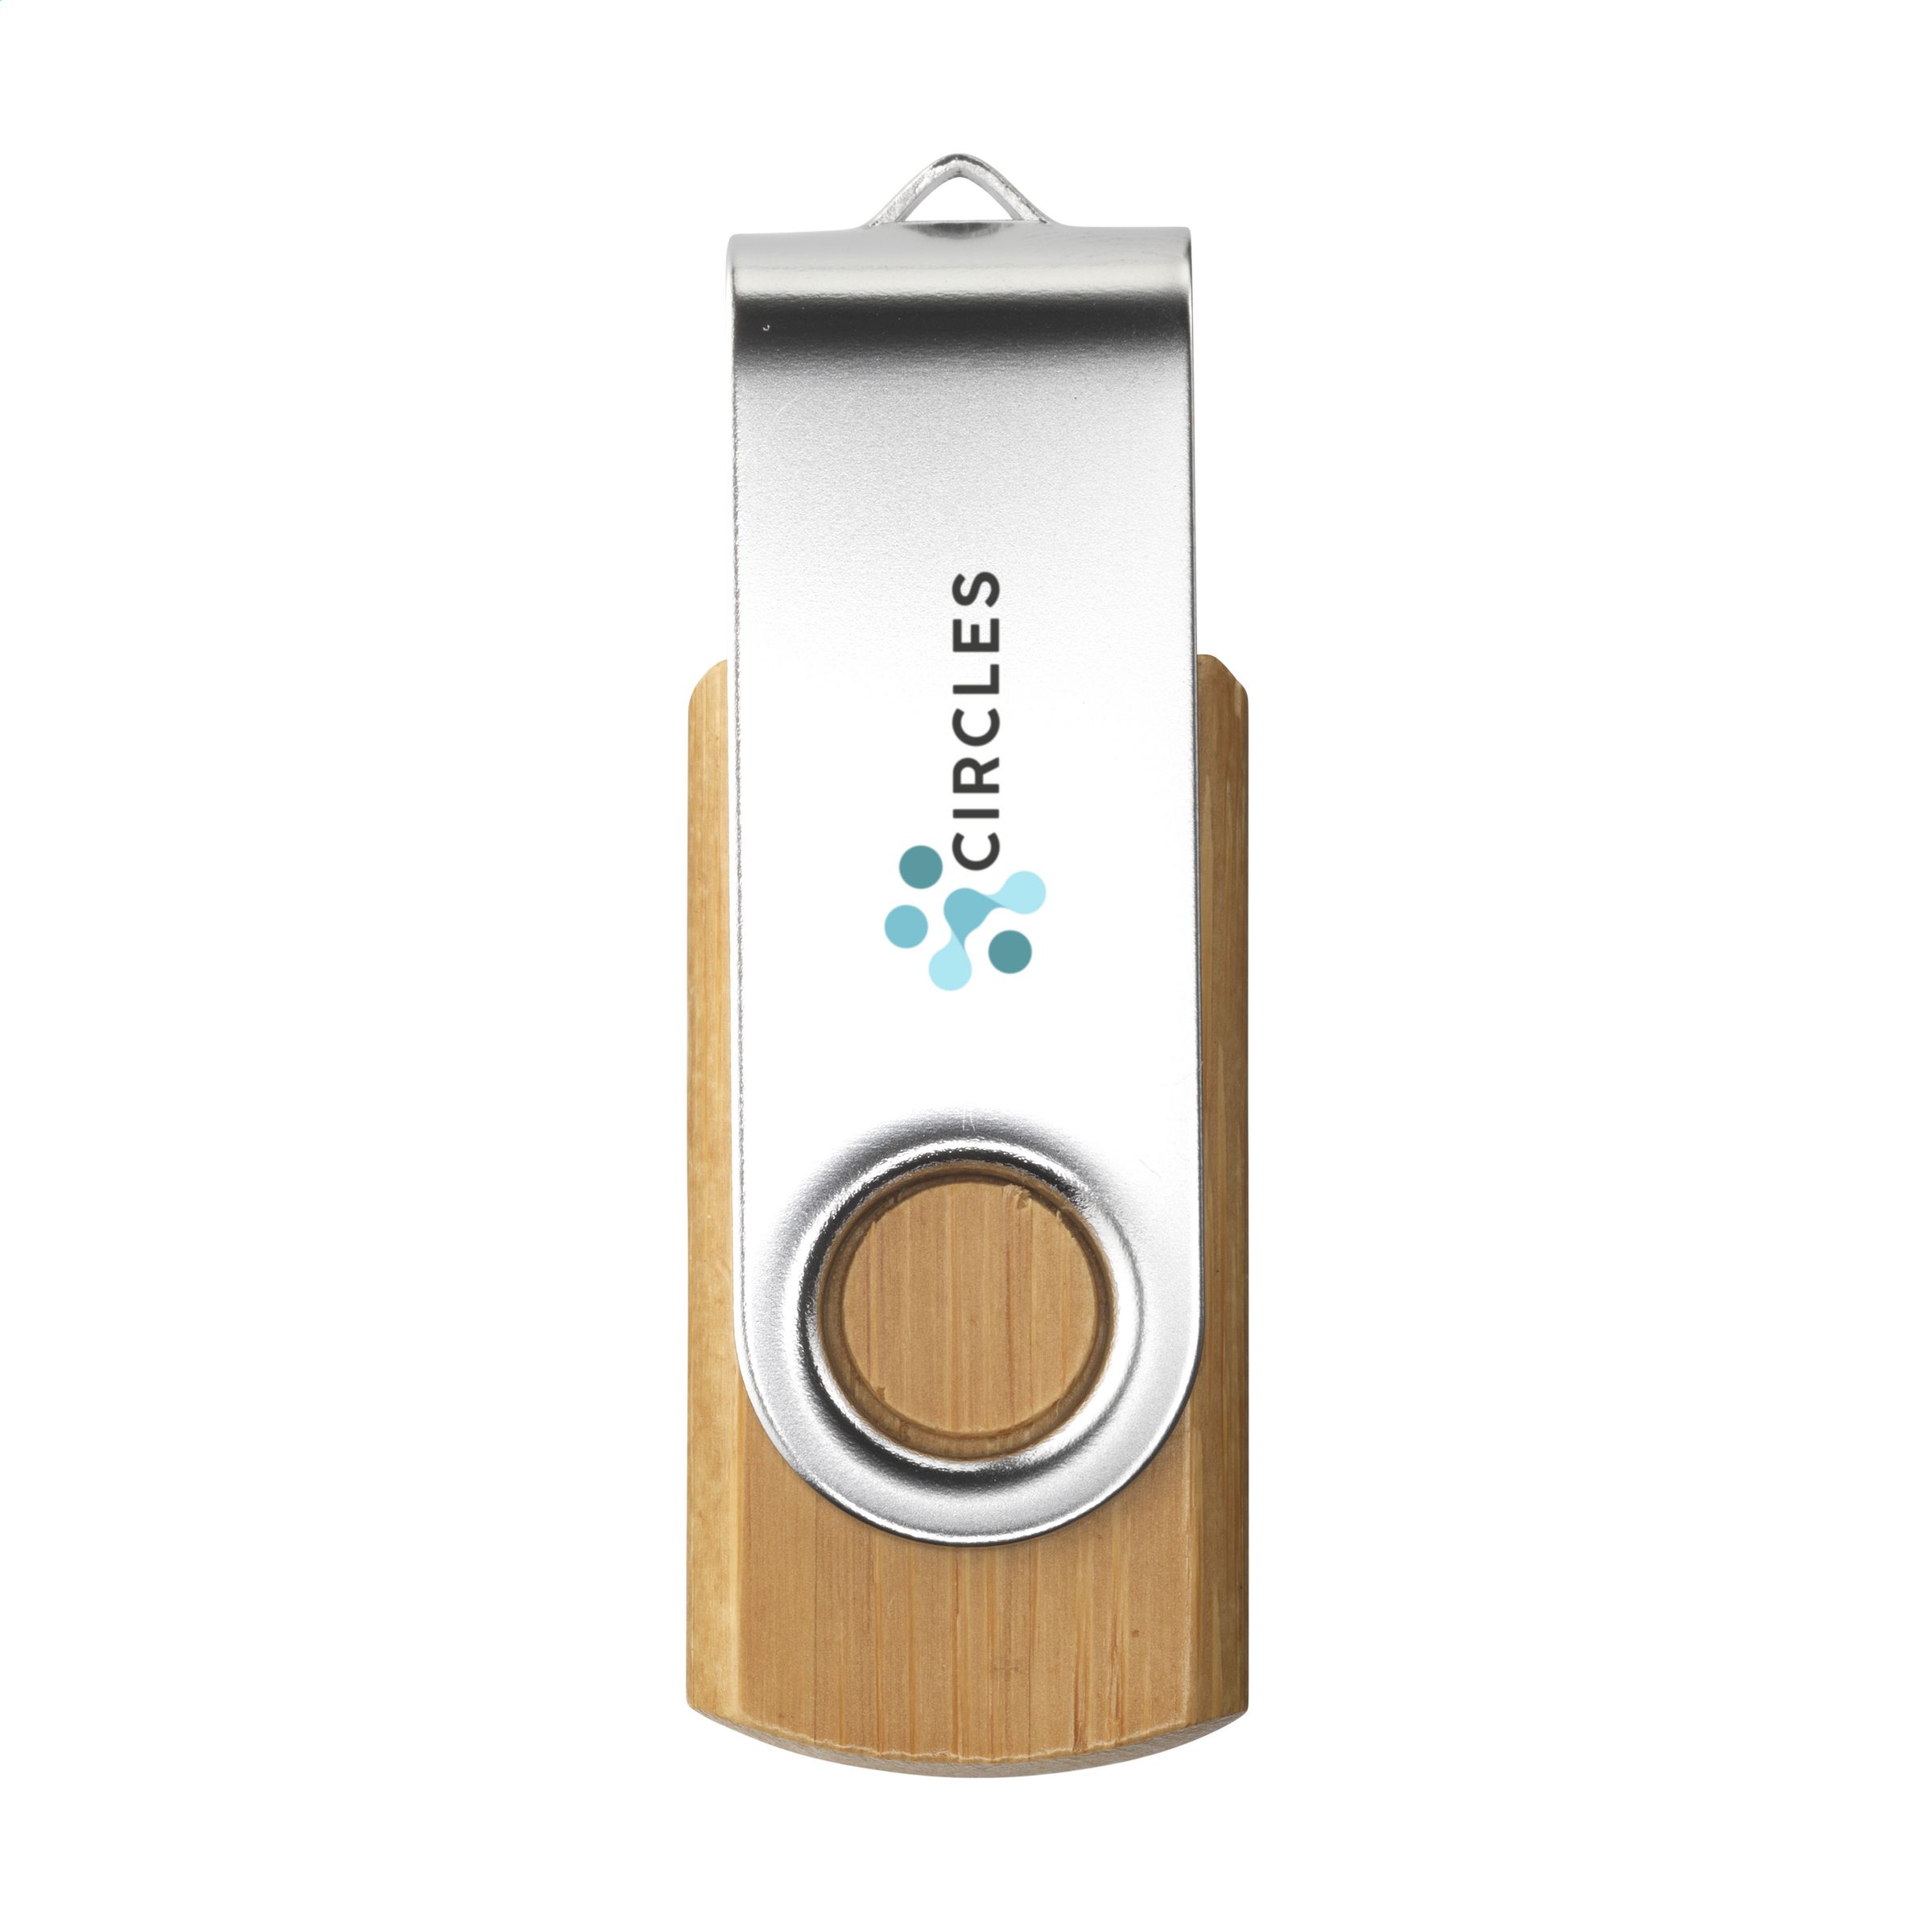 Bamboo Carbon USB - Launcher - Iver Heath